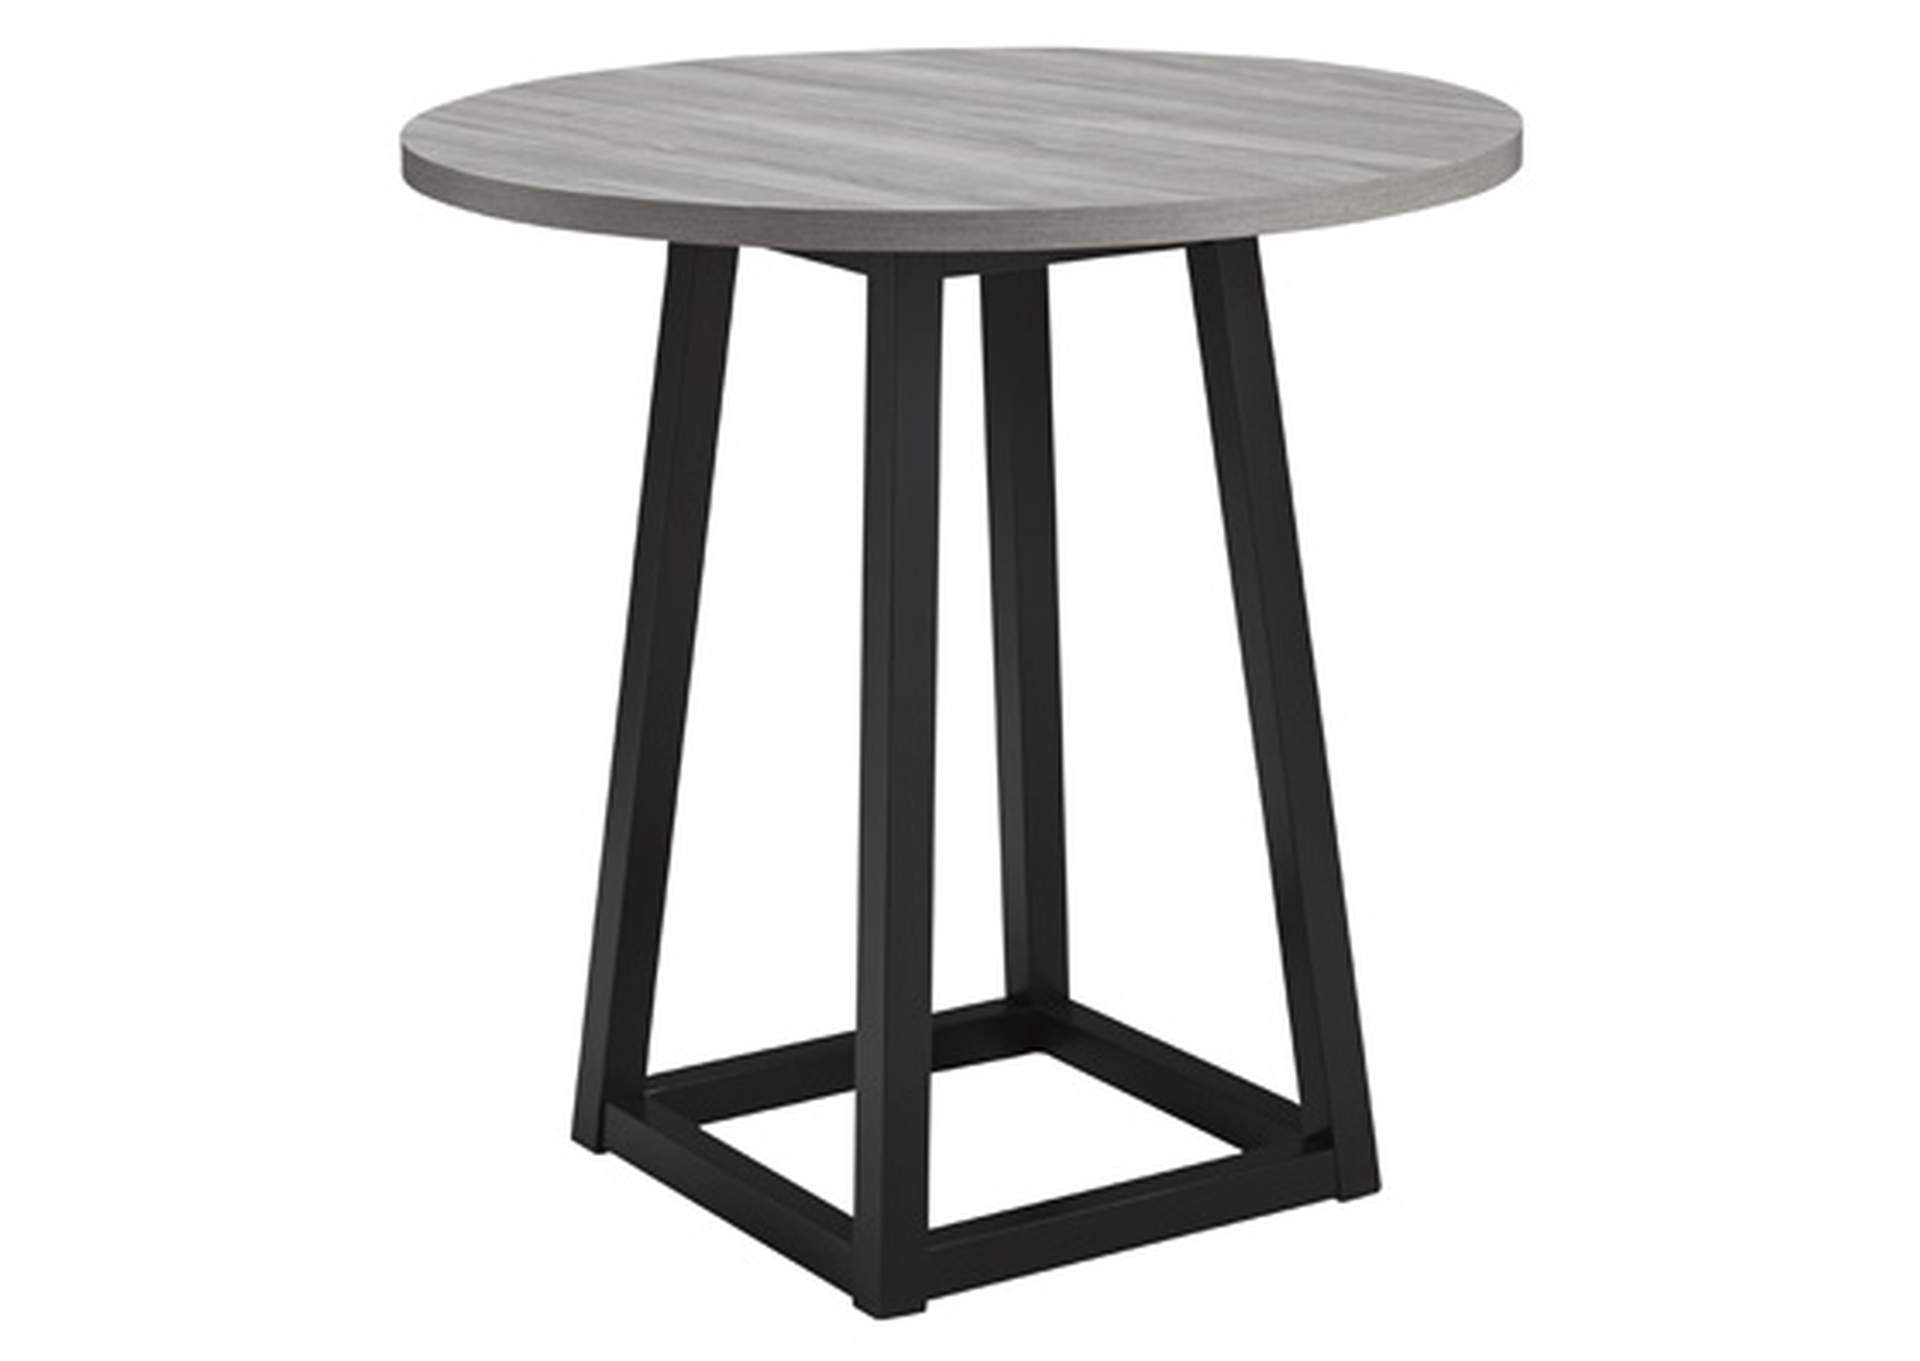 Showdell Counter Height Dining Table,Signature Design By Ashley